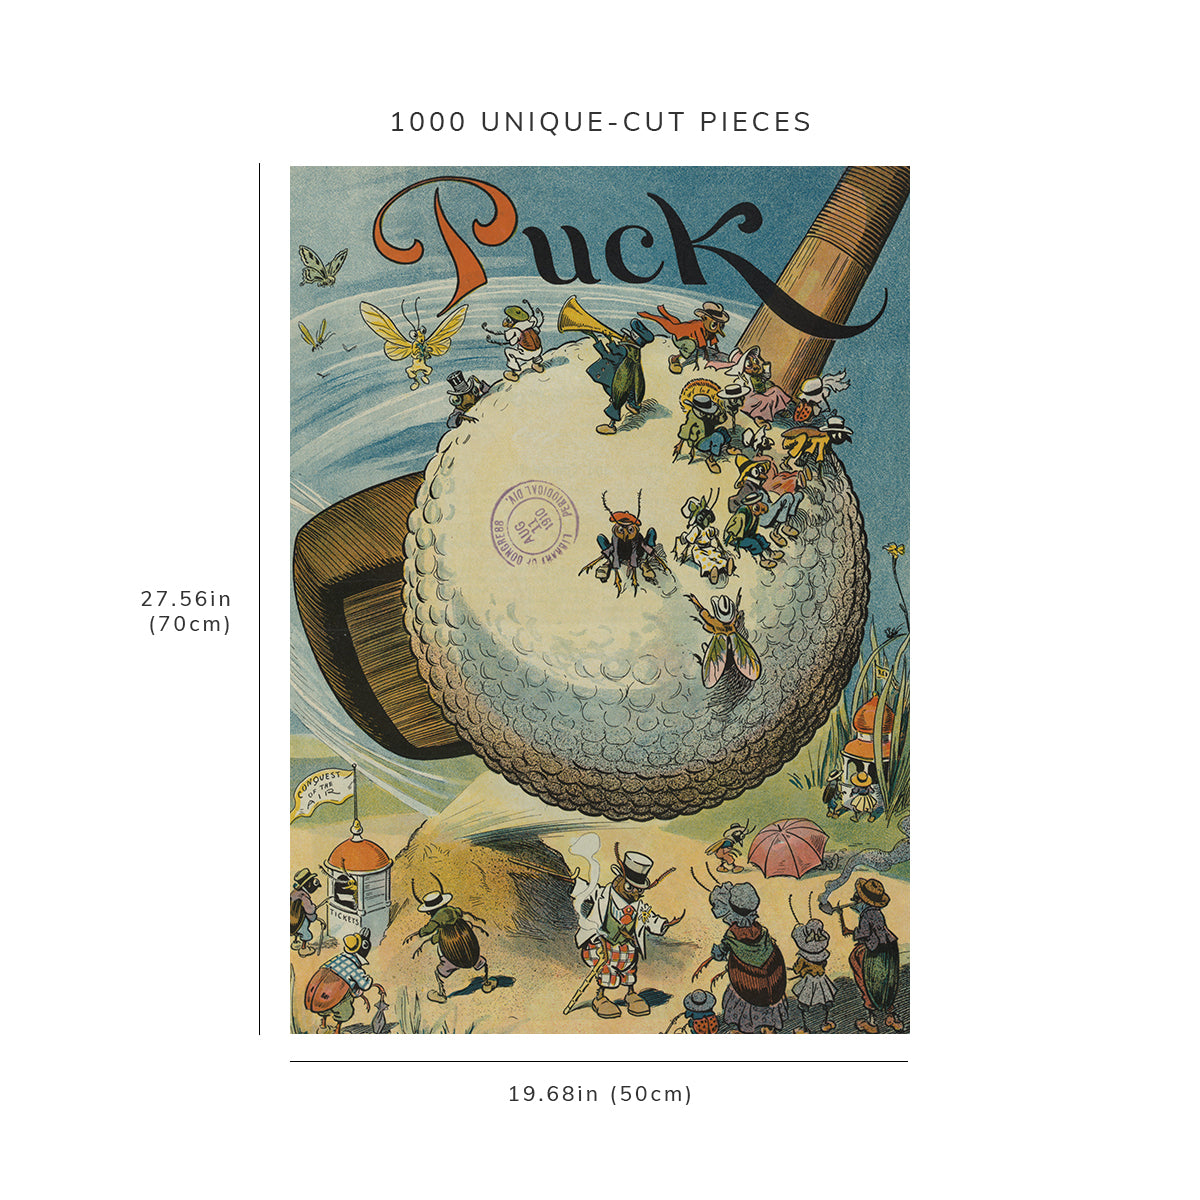 1000 piece puzzle - 1910 | The Airship Craze | Puck | golf club driving a golf ball covered with insects